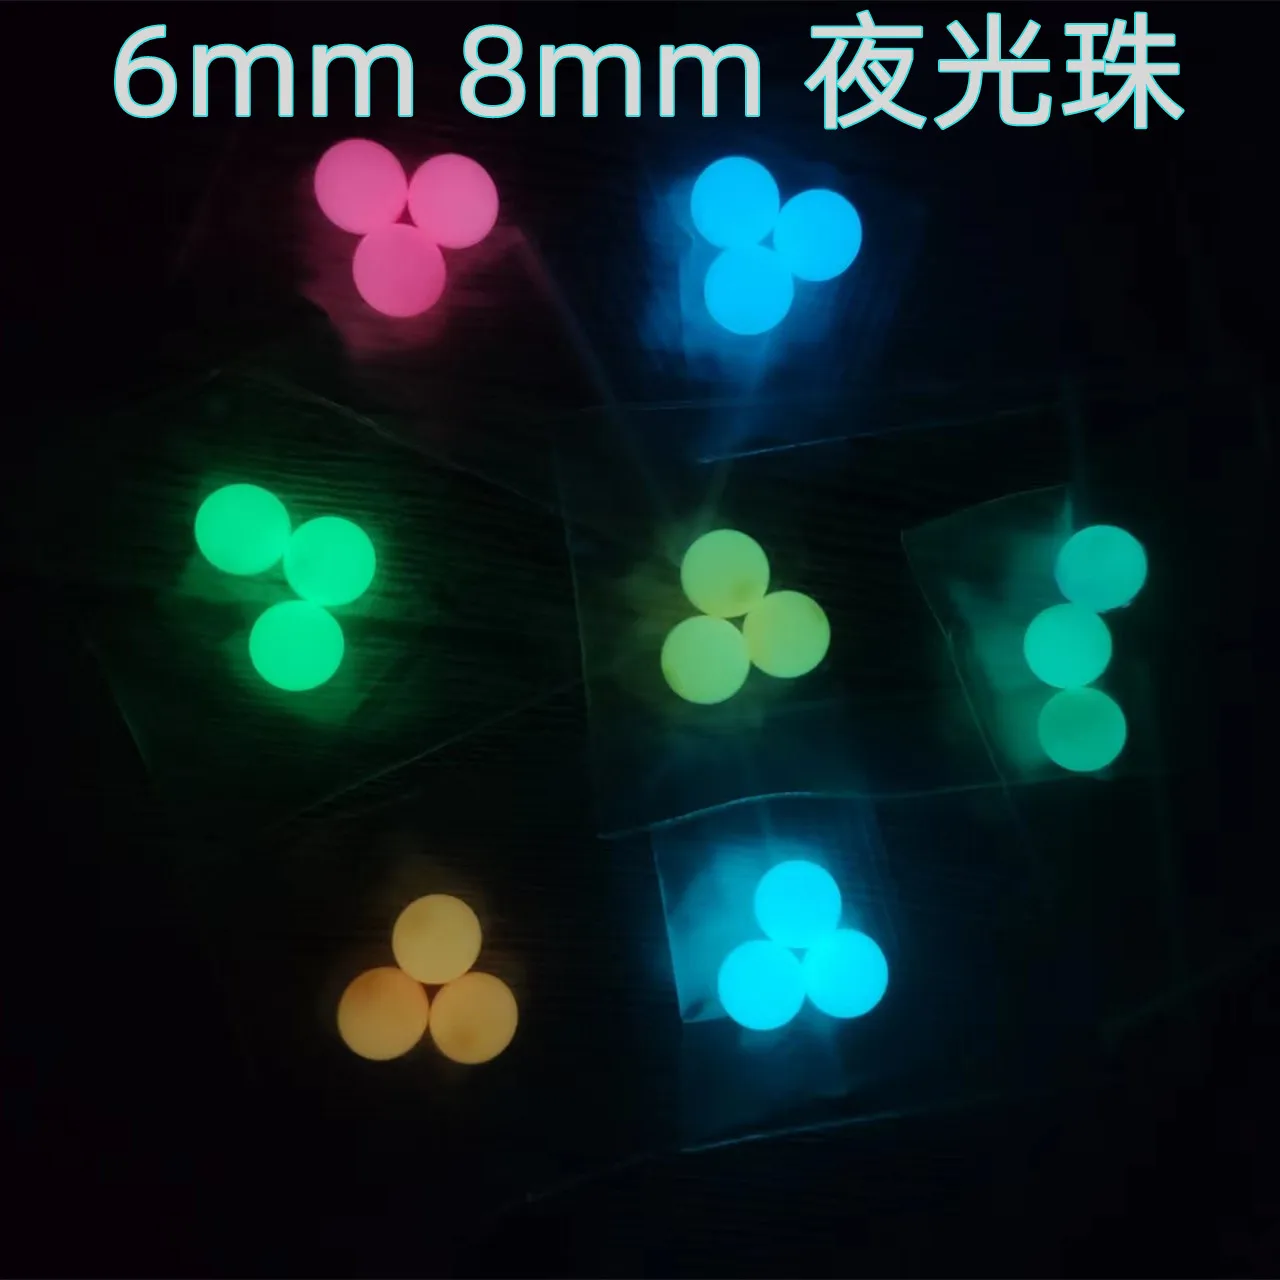 

Not tritium 6mm 8mm Edc Luminous Bead 6mm 8mm Resin Material With High Brightness And Durability